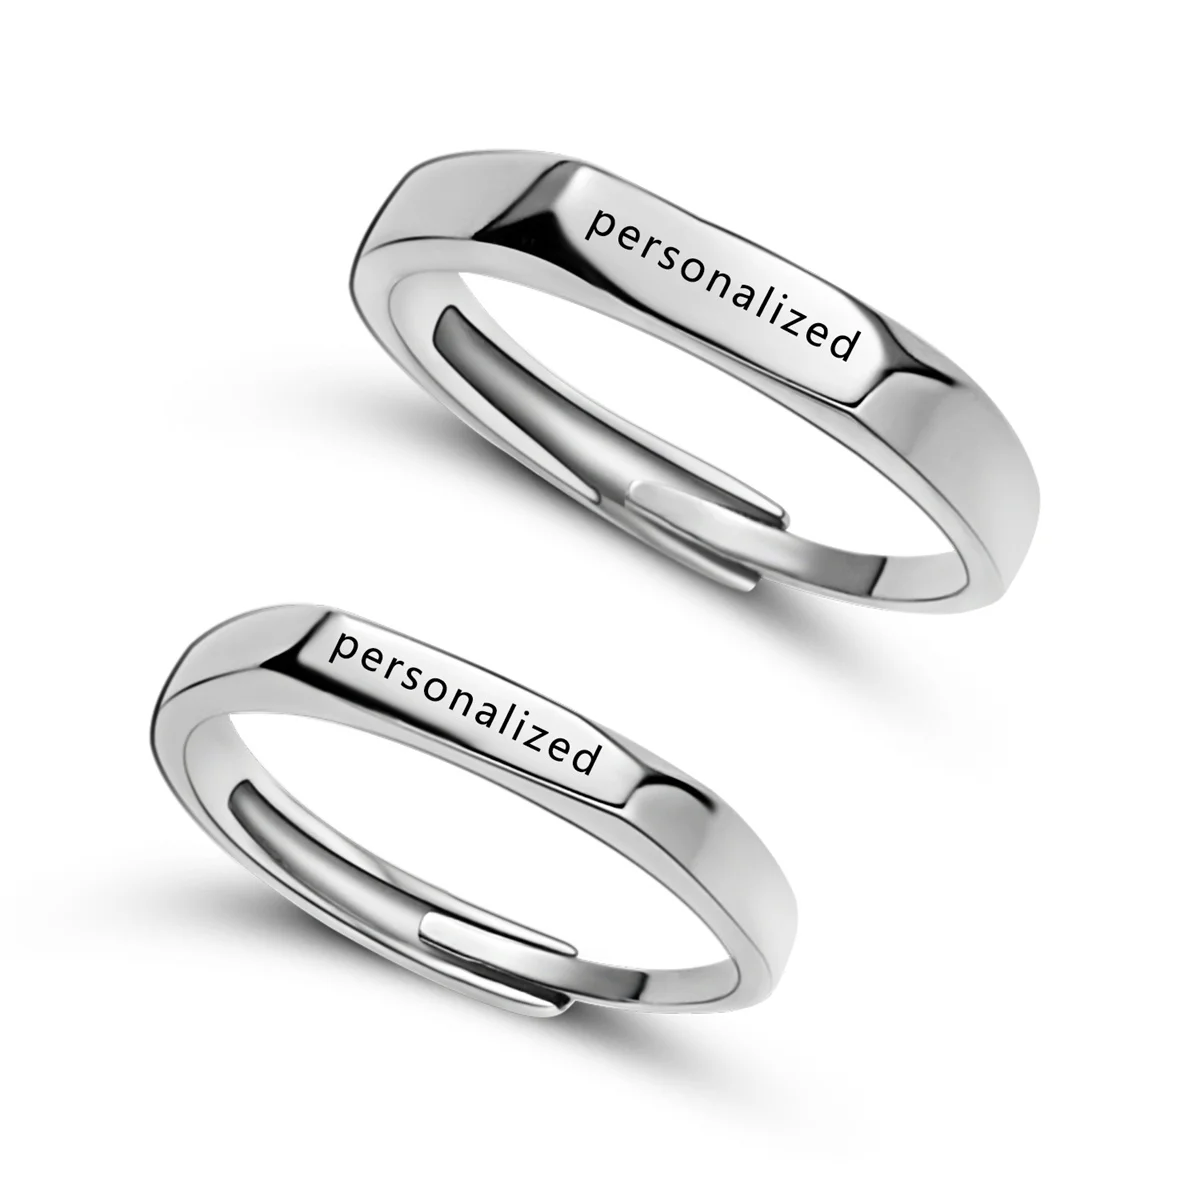 Personalized Custom Name Text Couple Rings For Women Men Stainless Steel Engraved Date Opening Ring Anniversary Gifts Jewelry u7 signet rings personalized stainless steel photo picture print text engraving heart couple ring for men women christmas gift